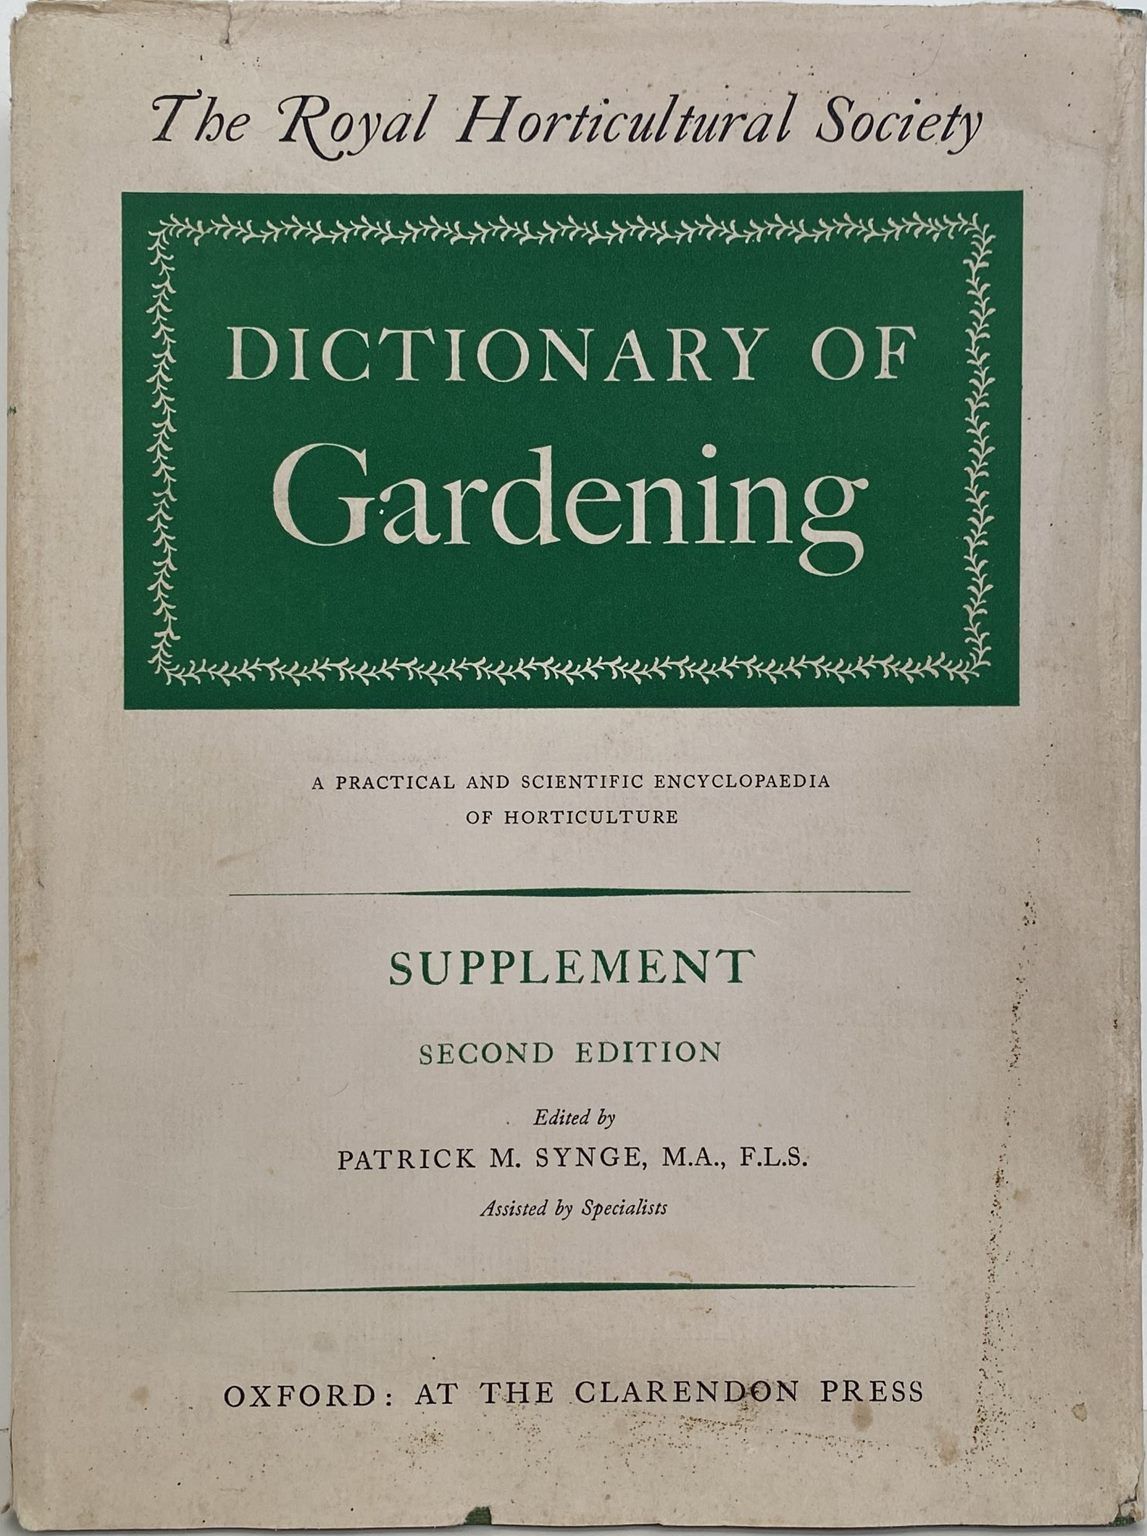 DICTIONARY OF GARDENING: Practical and Scientific Encyclopaedia of Horticulture